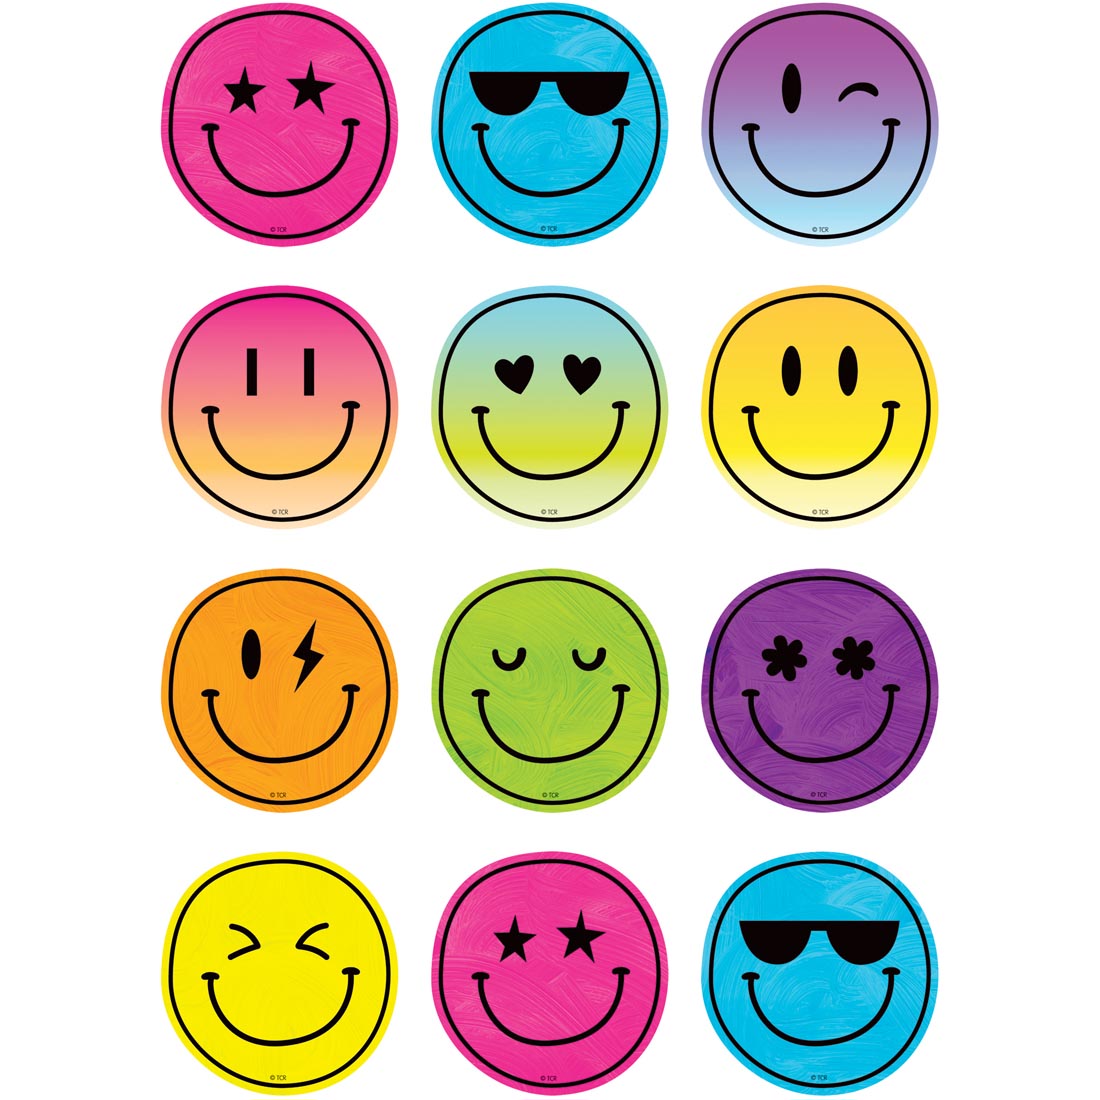 Smiley Faces Mini Accents from the Brights 4Ever collection by Teacher Created Resources